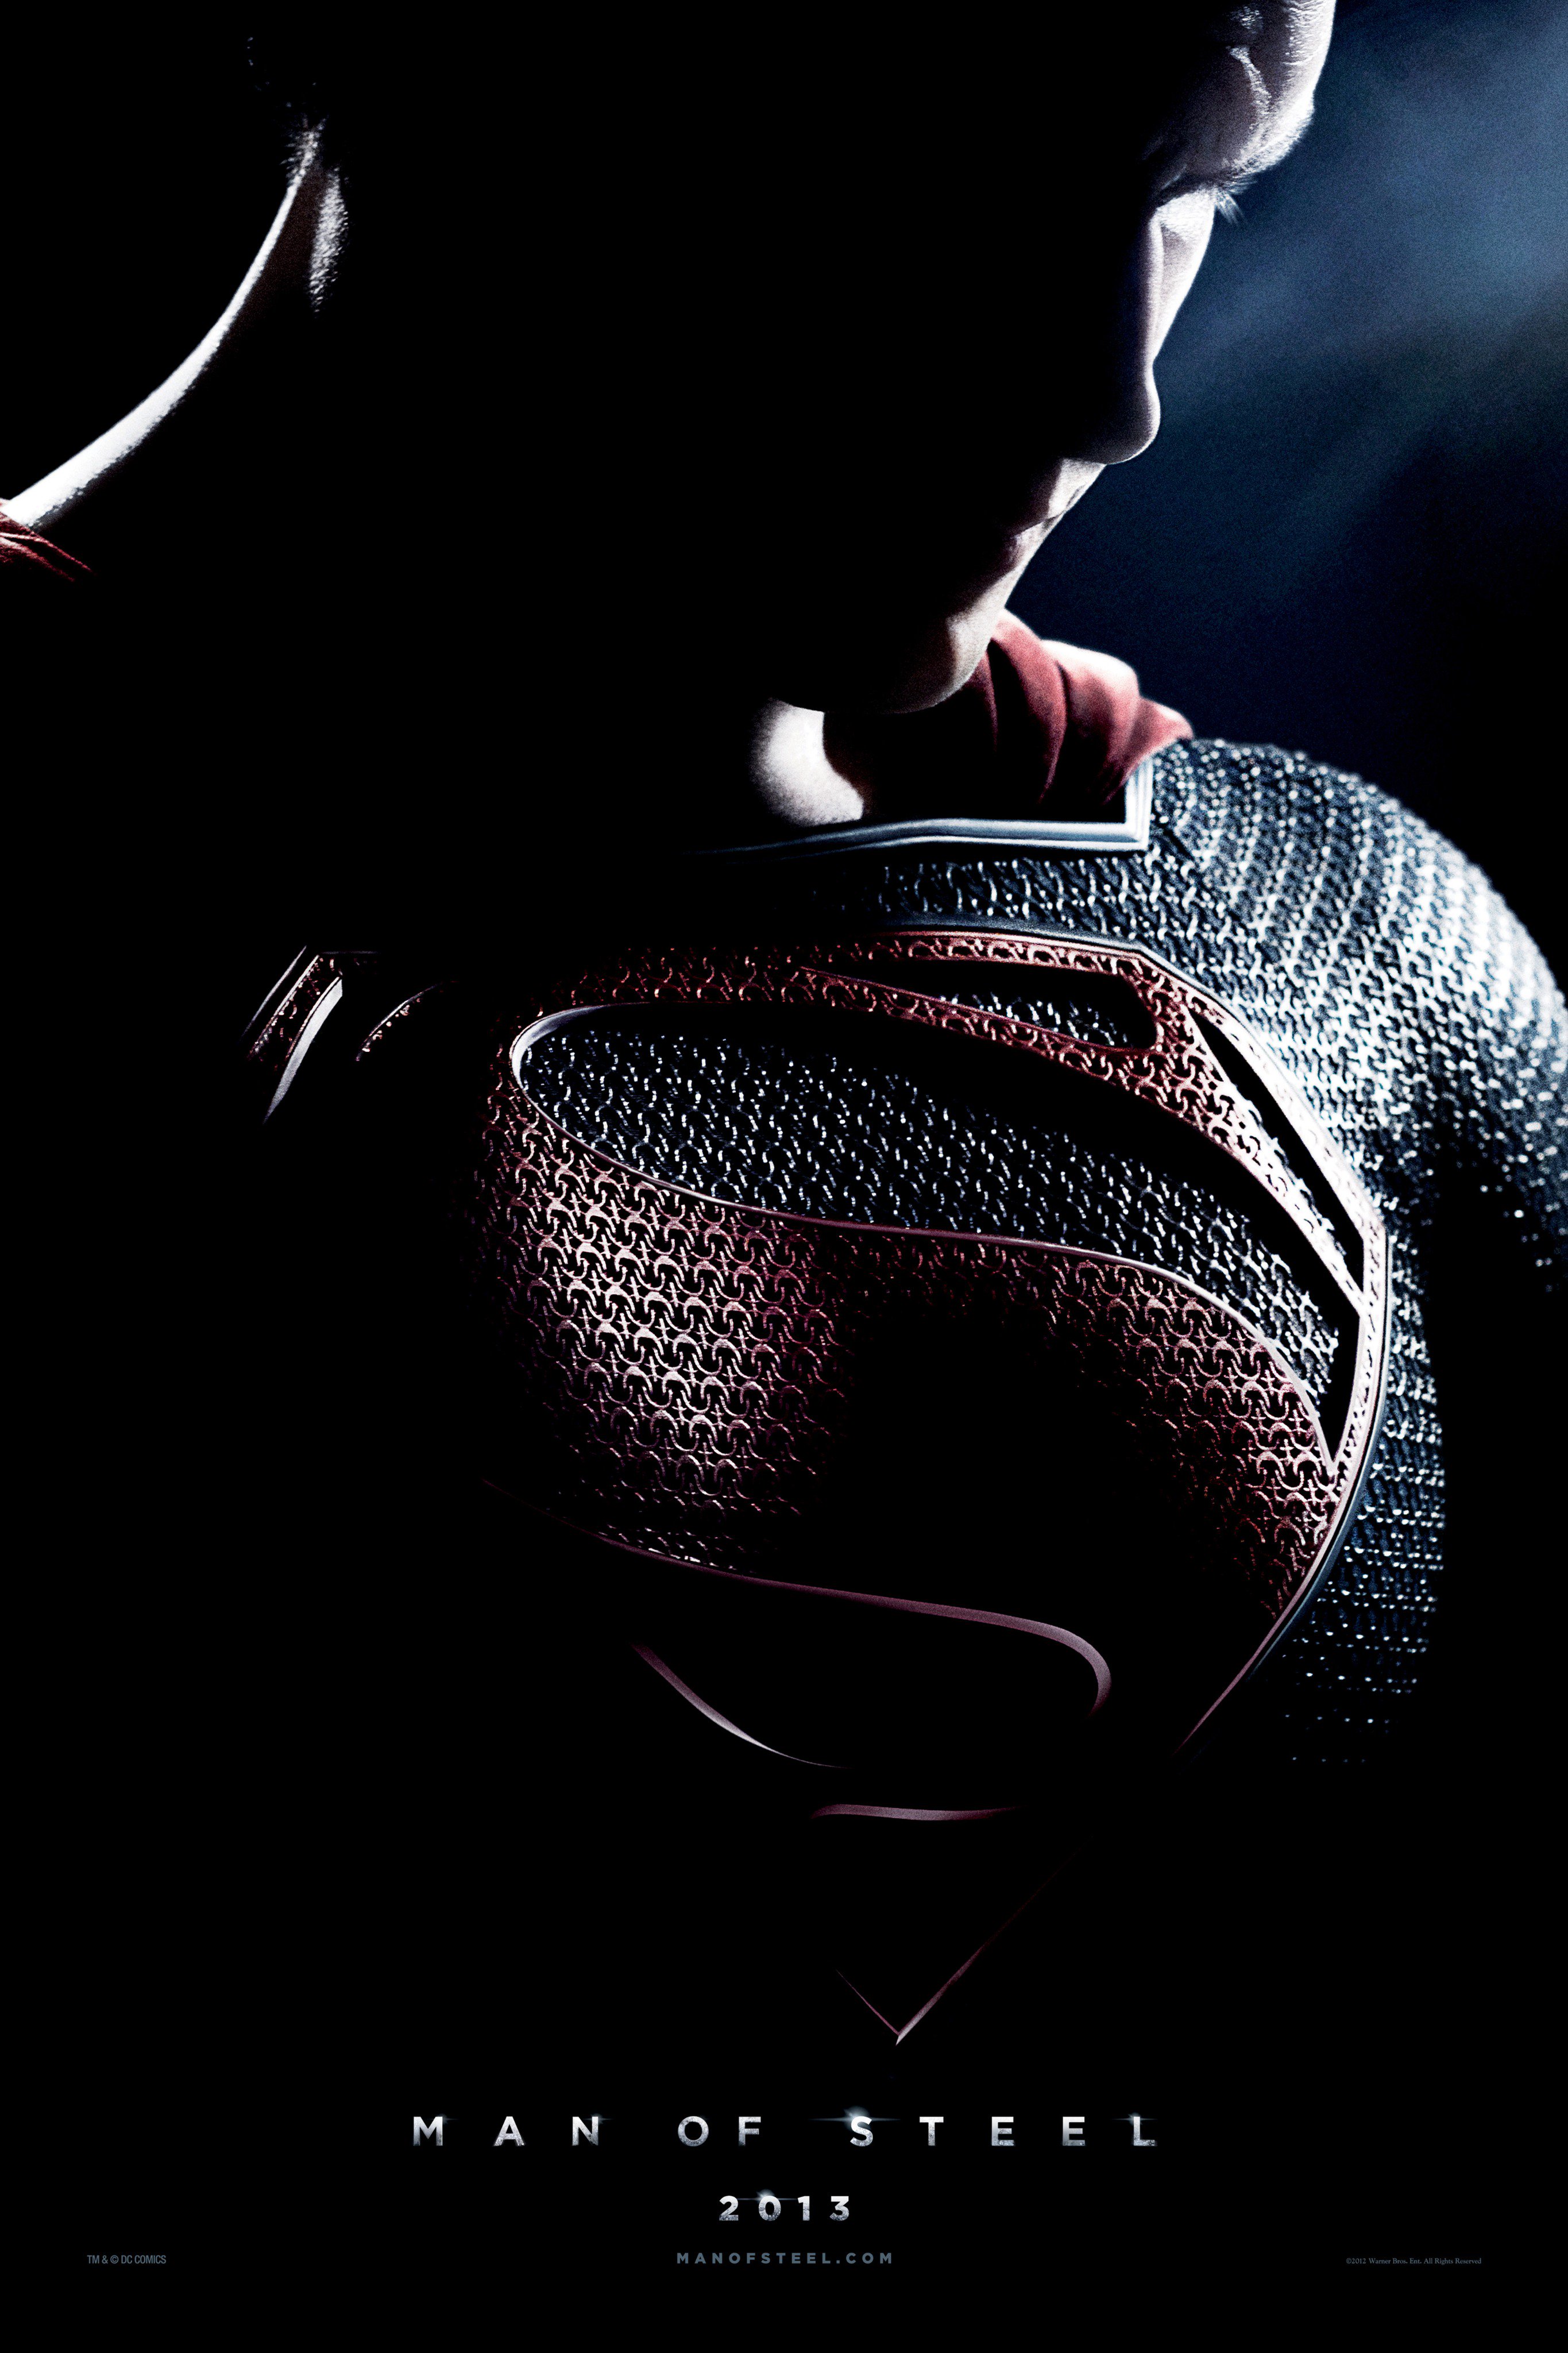 WB Releases New MAN OF STEEL Poster on Twitter